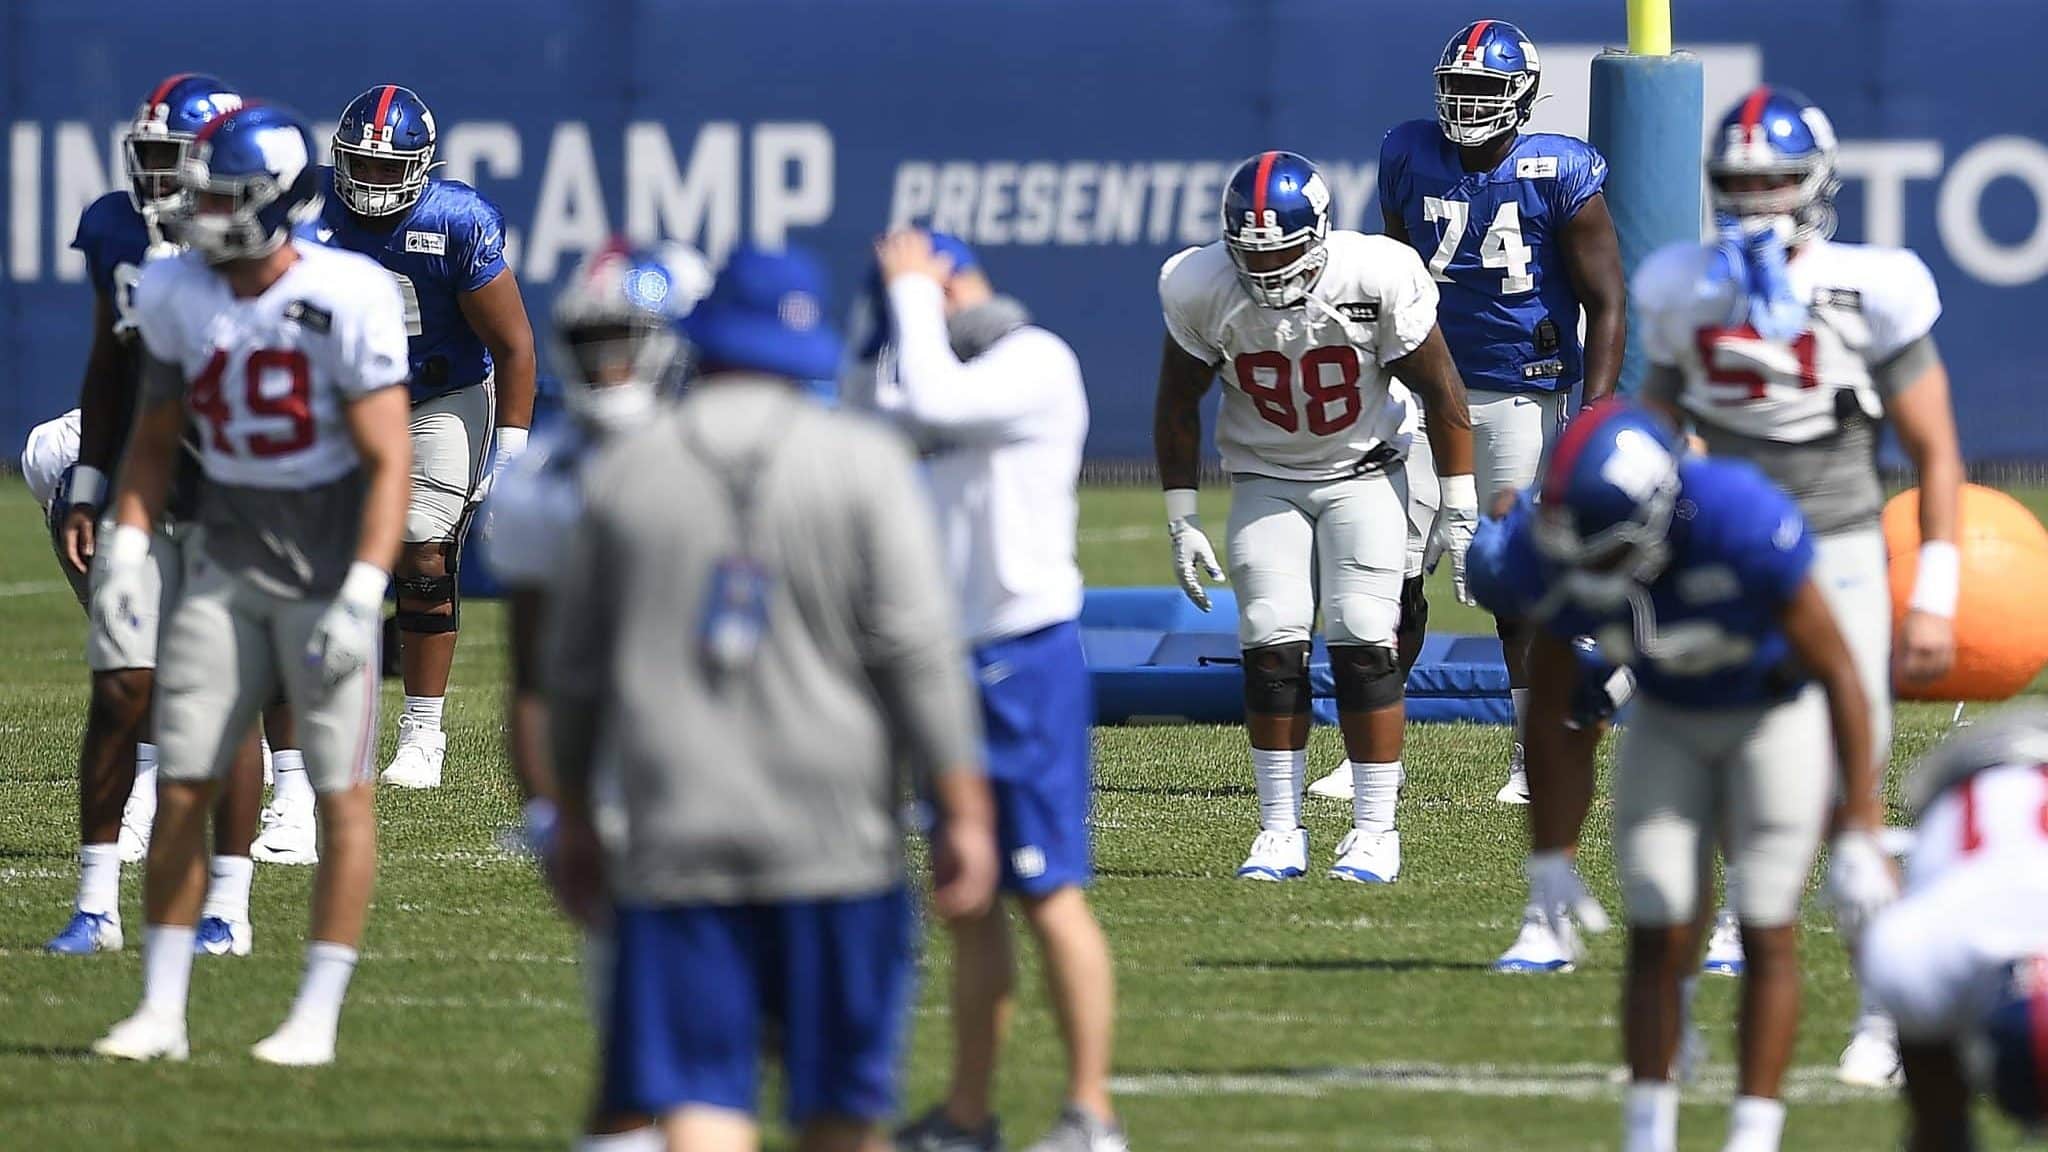 EAST RUTHERFORD, NEW JERSEY - AUGUST 21: Matt Peart #74 of the New York Giants looks on while stretching during training camp at NY Giants Quest Diagnostics Training Center on August 21, 2020 in East Rutherford, New Jersey.